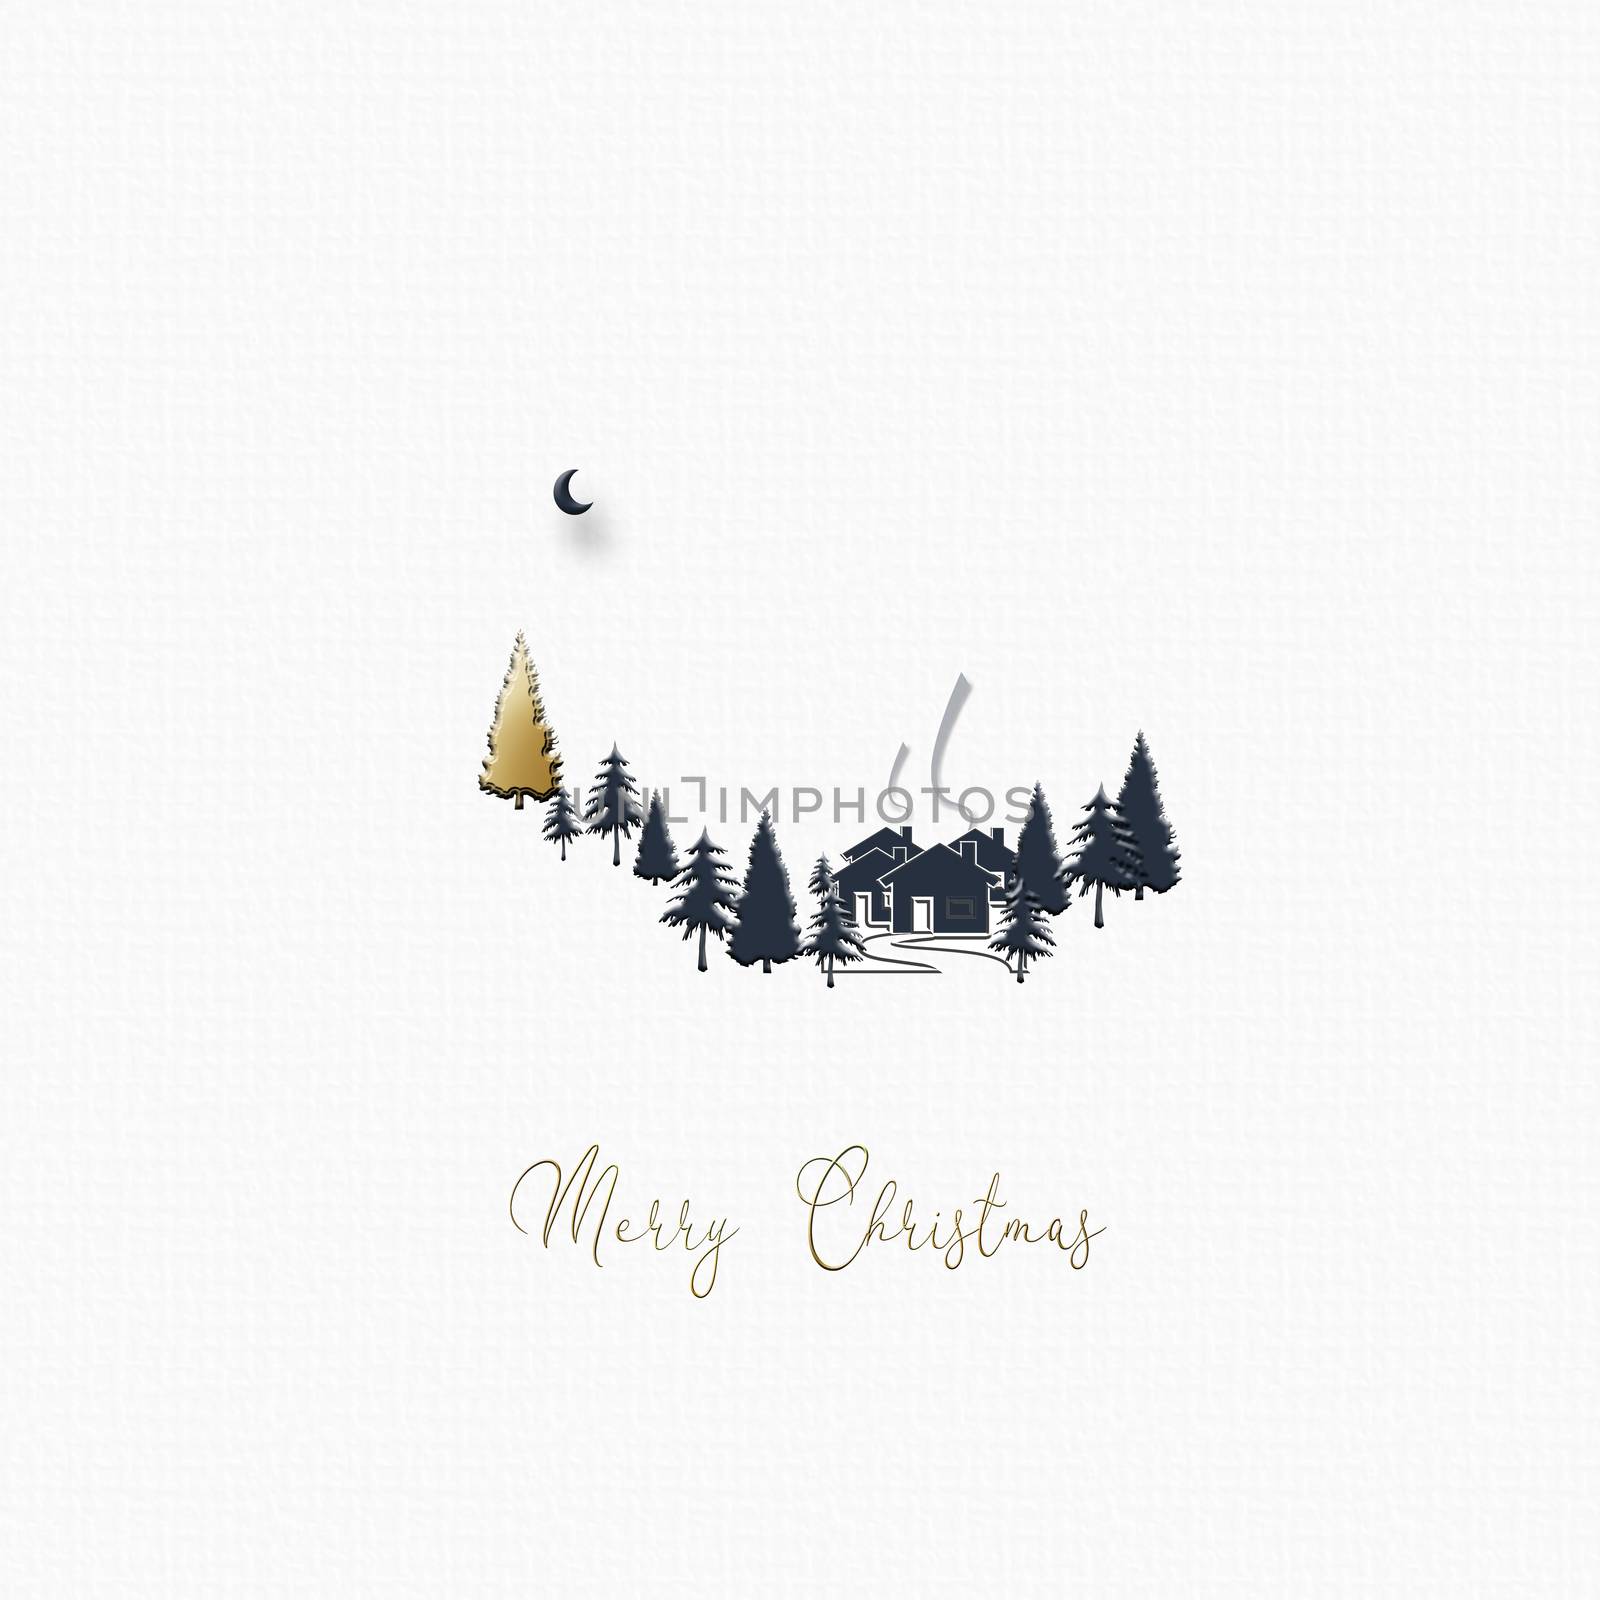 Beautiful minimalist Christmas 2021 New Year winter landscape with houses, moon, pine fir and gold Christmas tree on white background. Text Merry Christmas. Design, poster. 3D Illustration